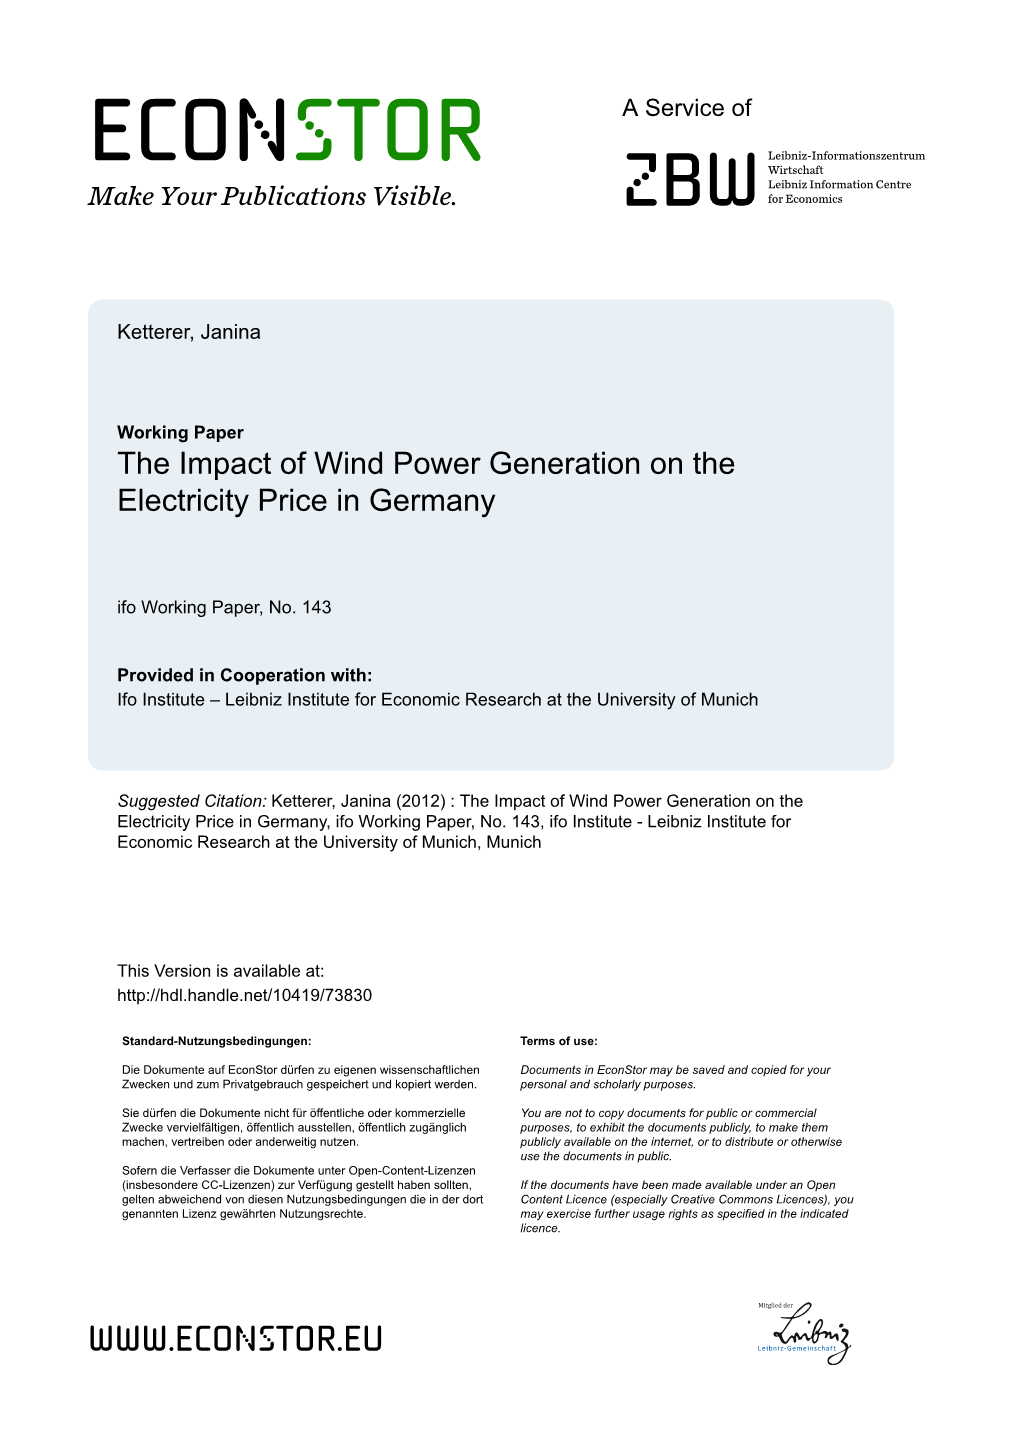 The Impact of Wind Power Generation on the Electricity Price in Germany